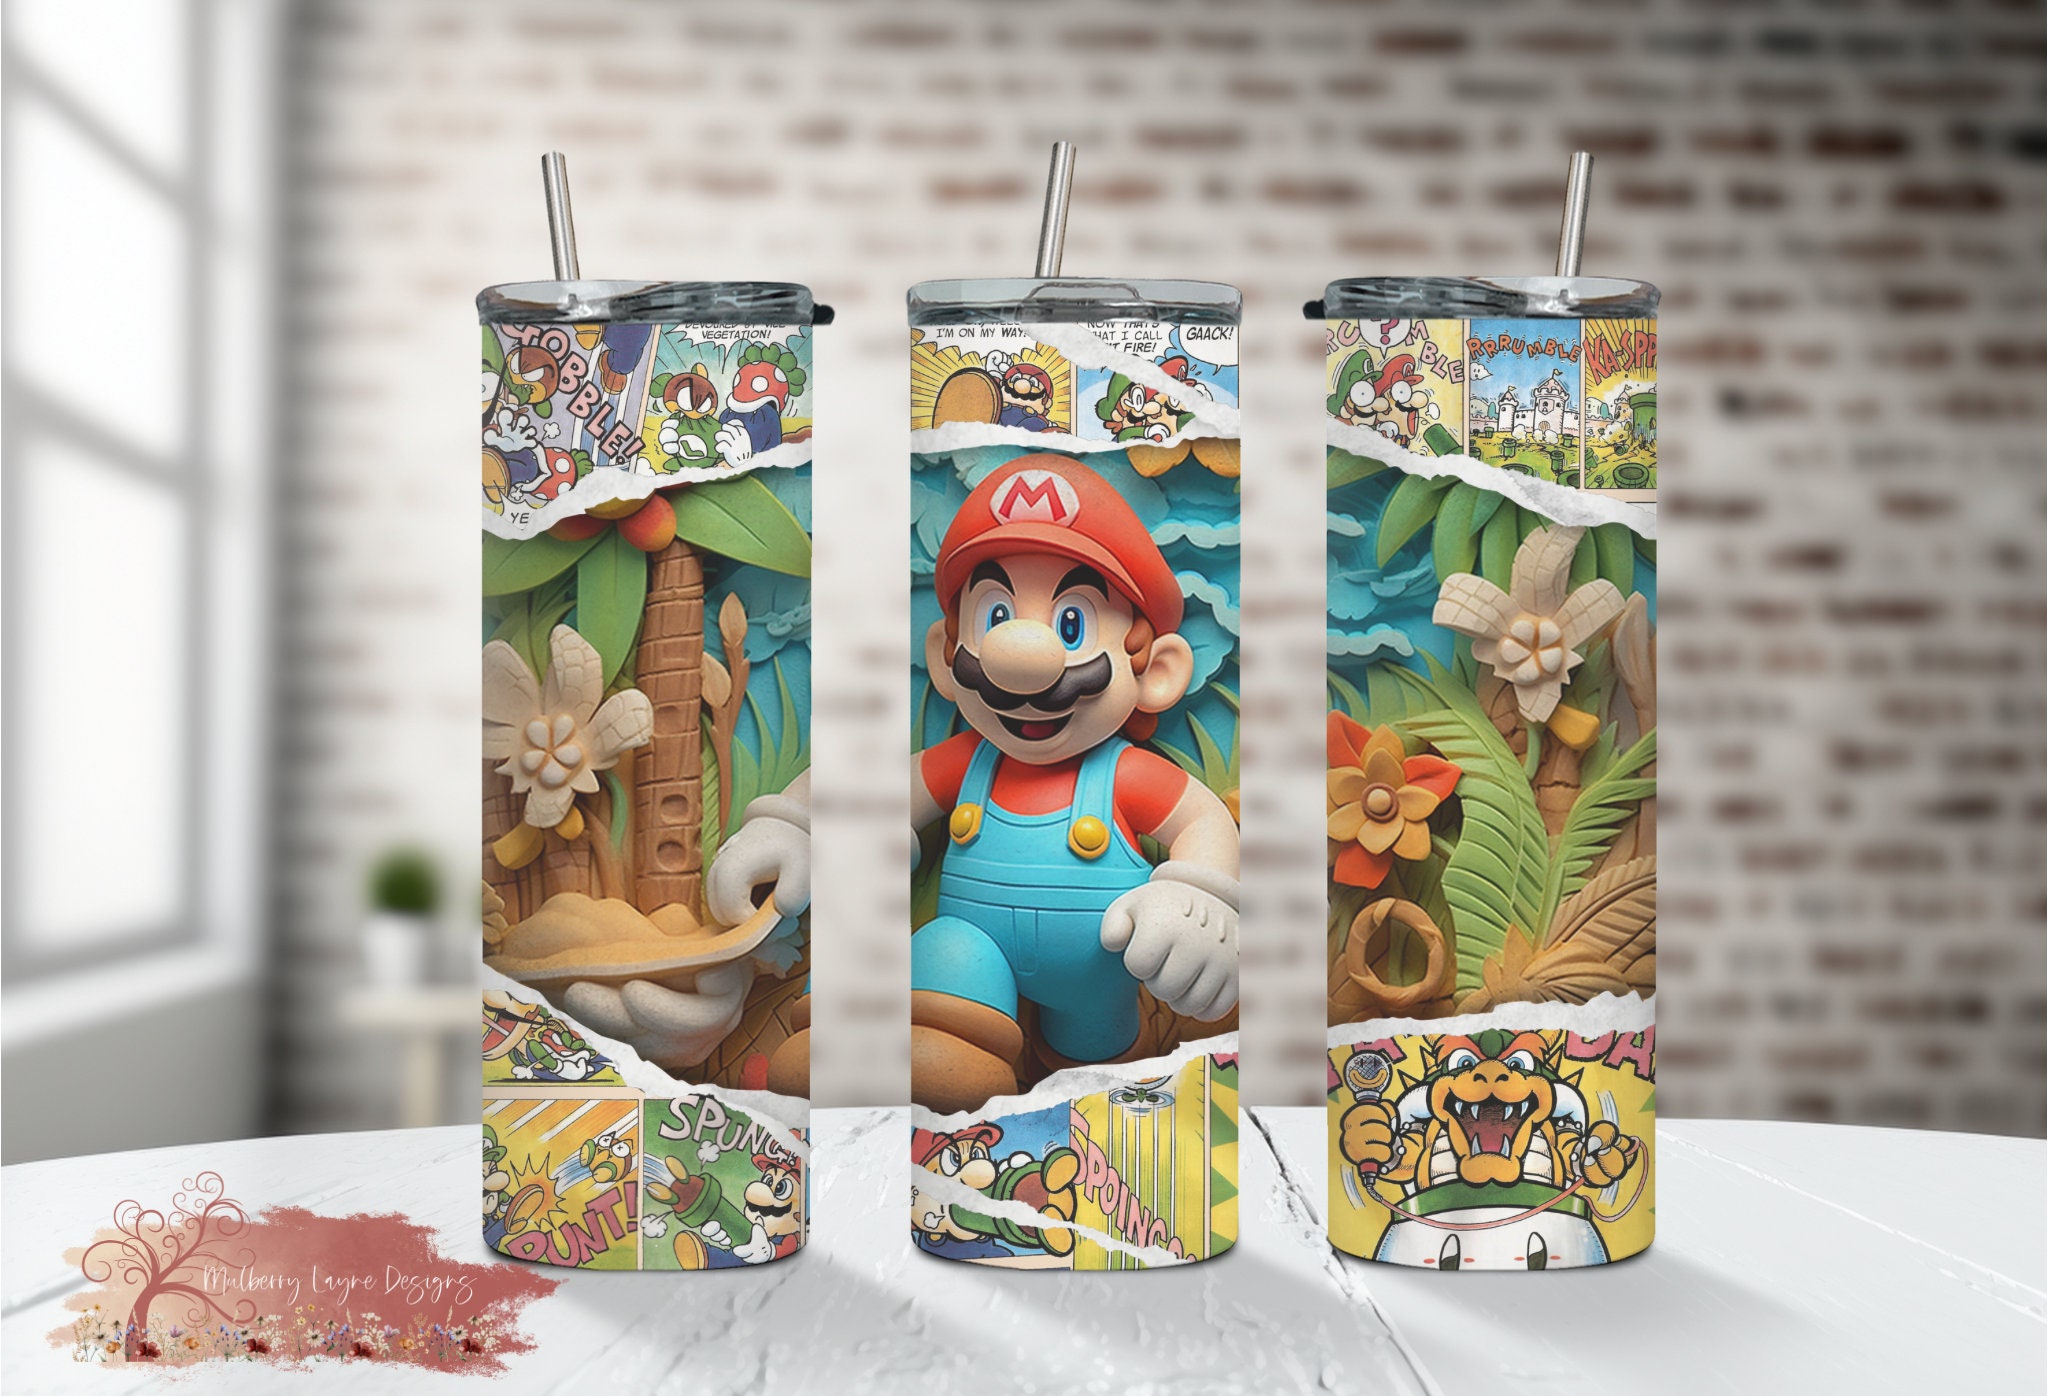 Super Mario Birthday Party Supplies Decorations Mylars Banner Cups Bendy  Straws